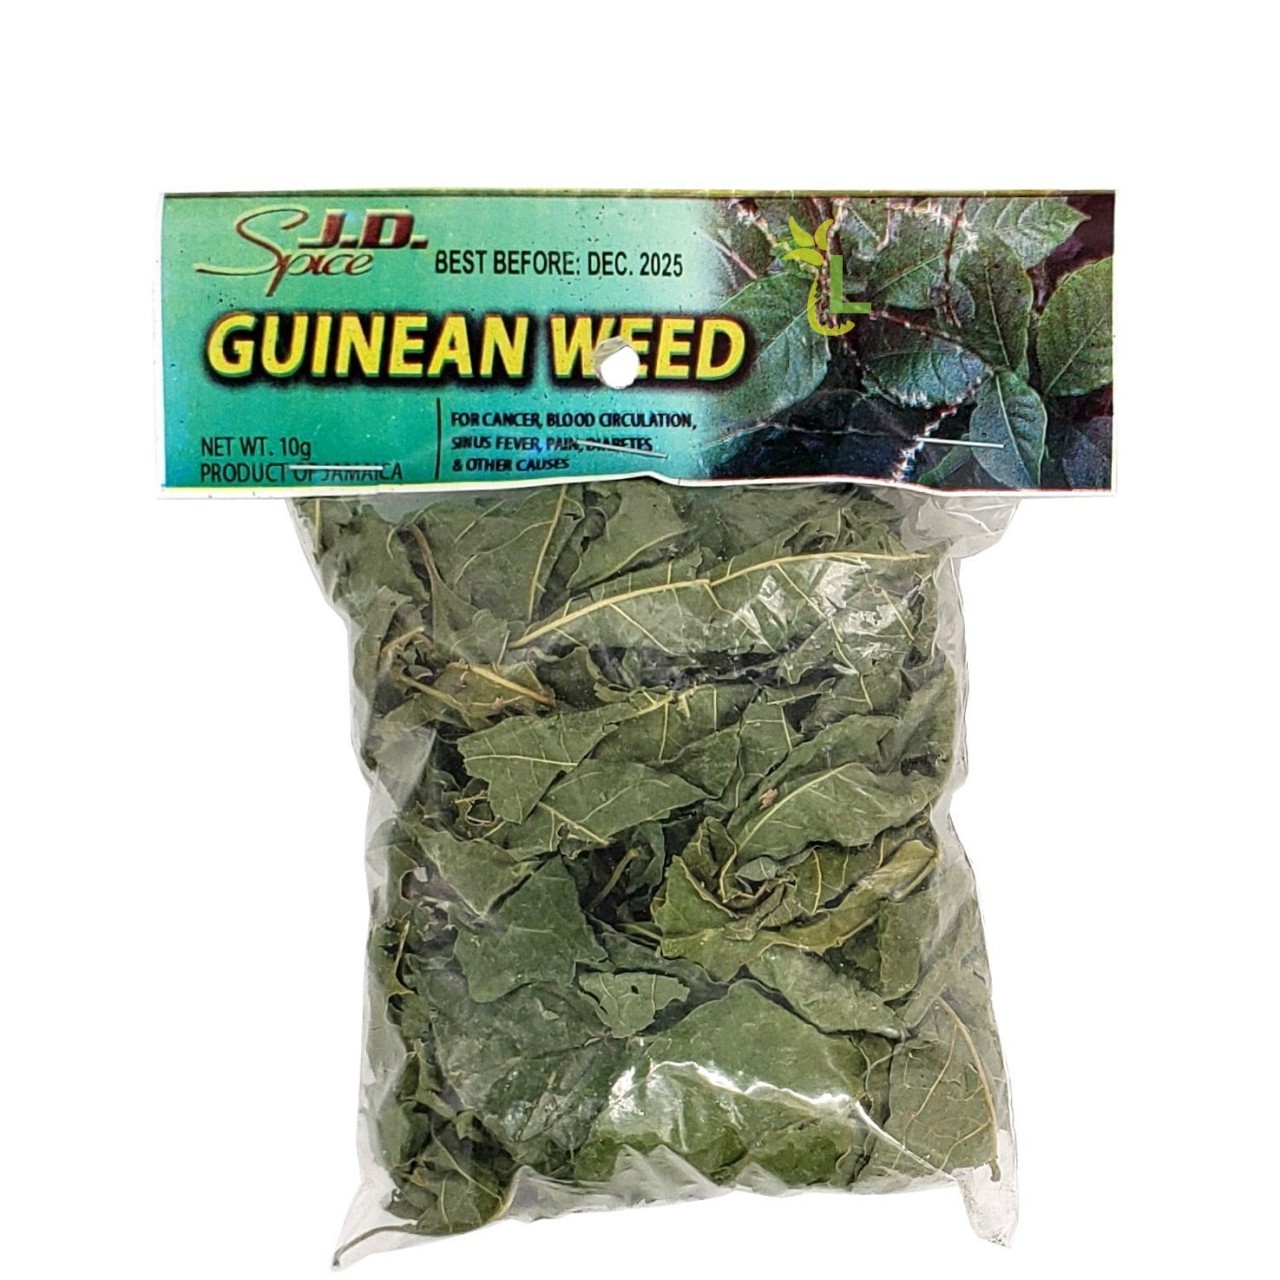 JD SPICE GUINEAN WEED 10g